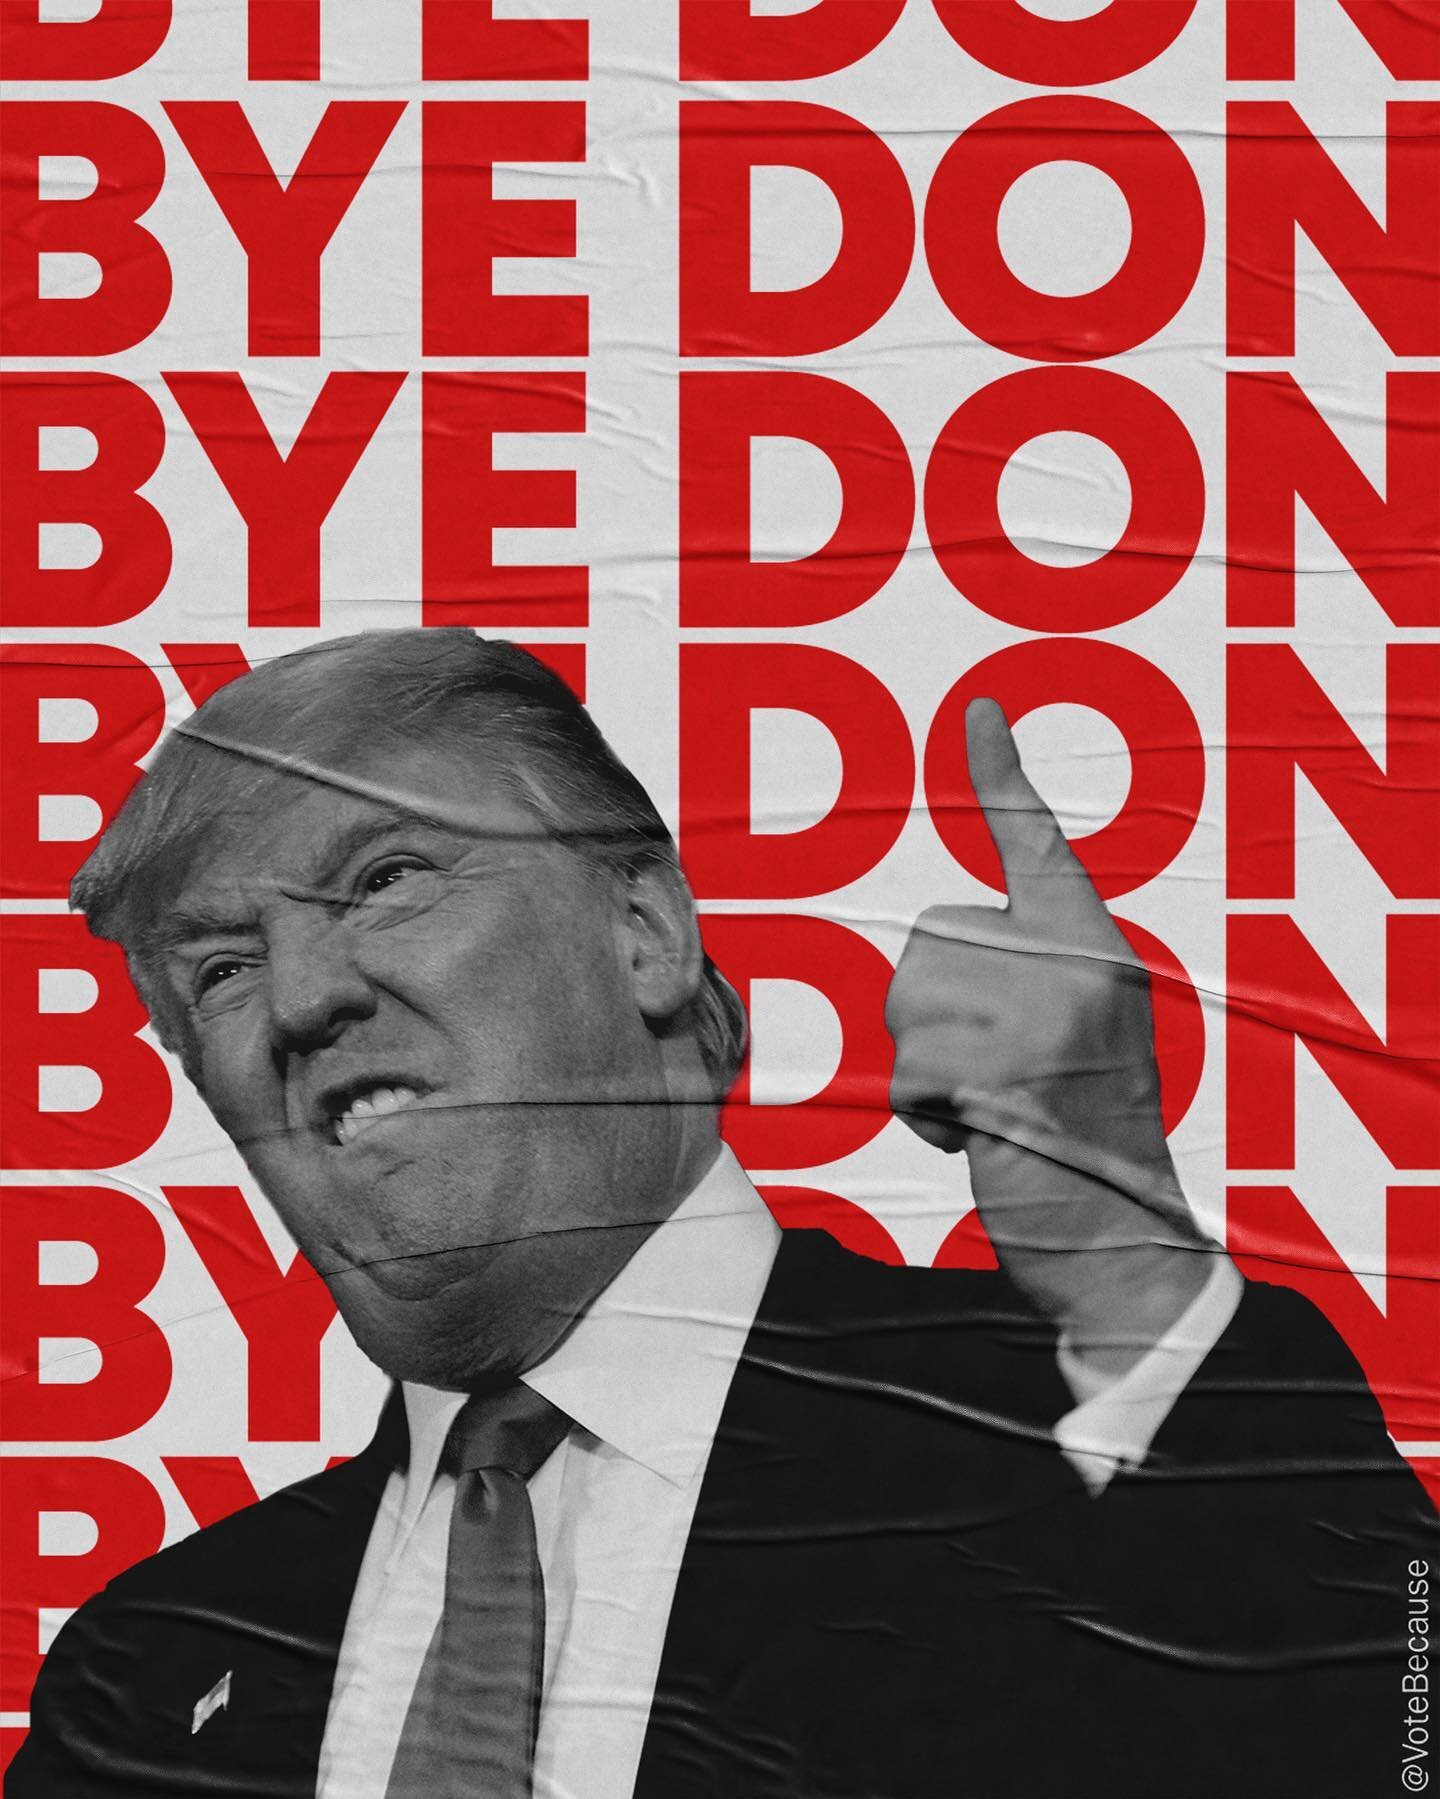 Finally, after a 4-year nightmare, it&rsquo;s time to say goodbye to Donald Trump. The people have spoken in numbers never seen before, and despite his attempts to kick and scream and demand that legal votes not be counted, democracy has won. Now we 